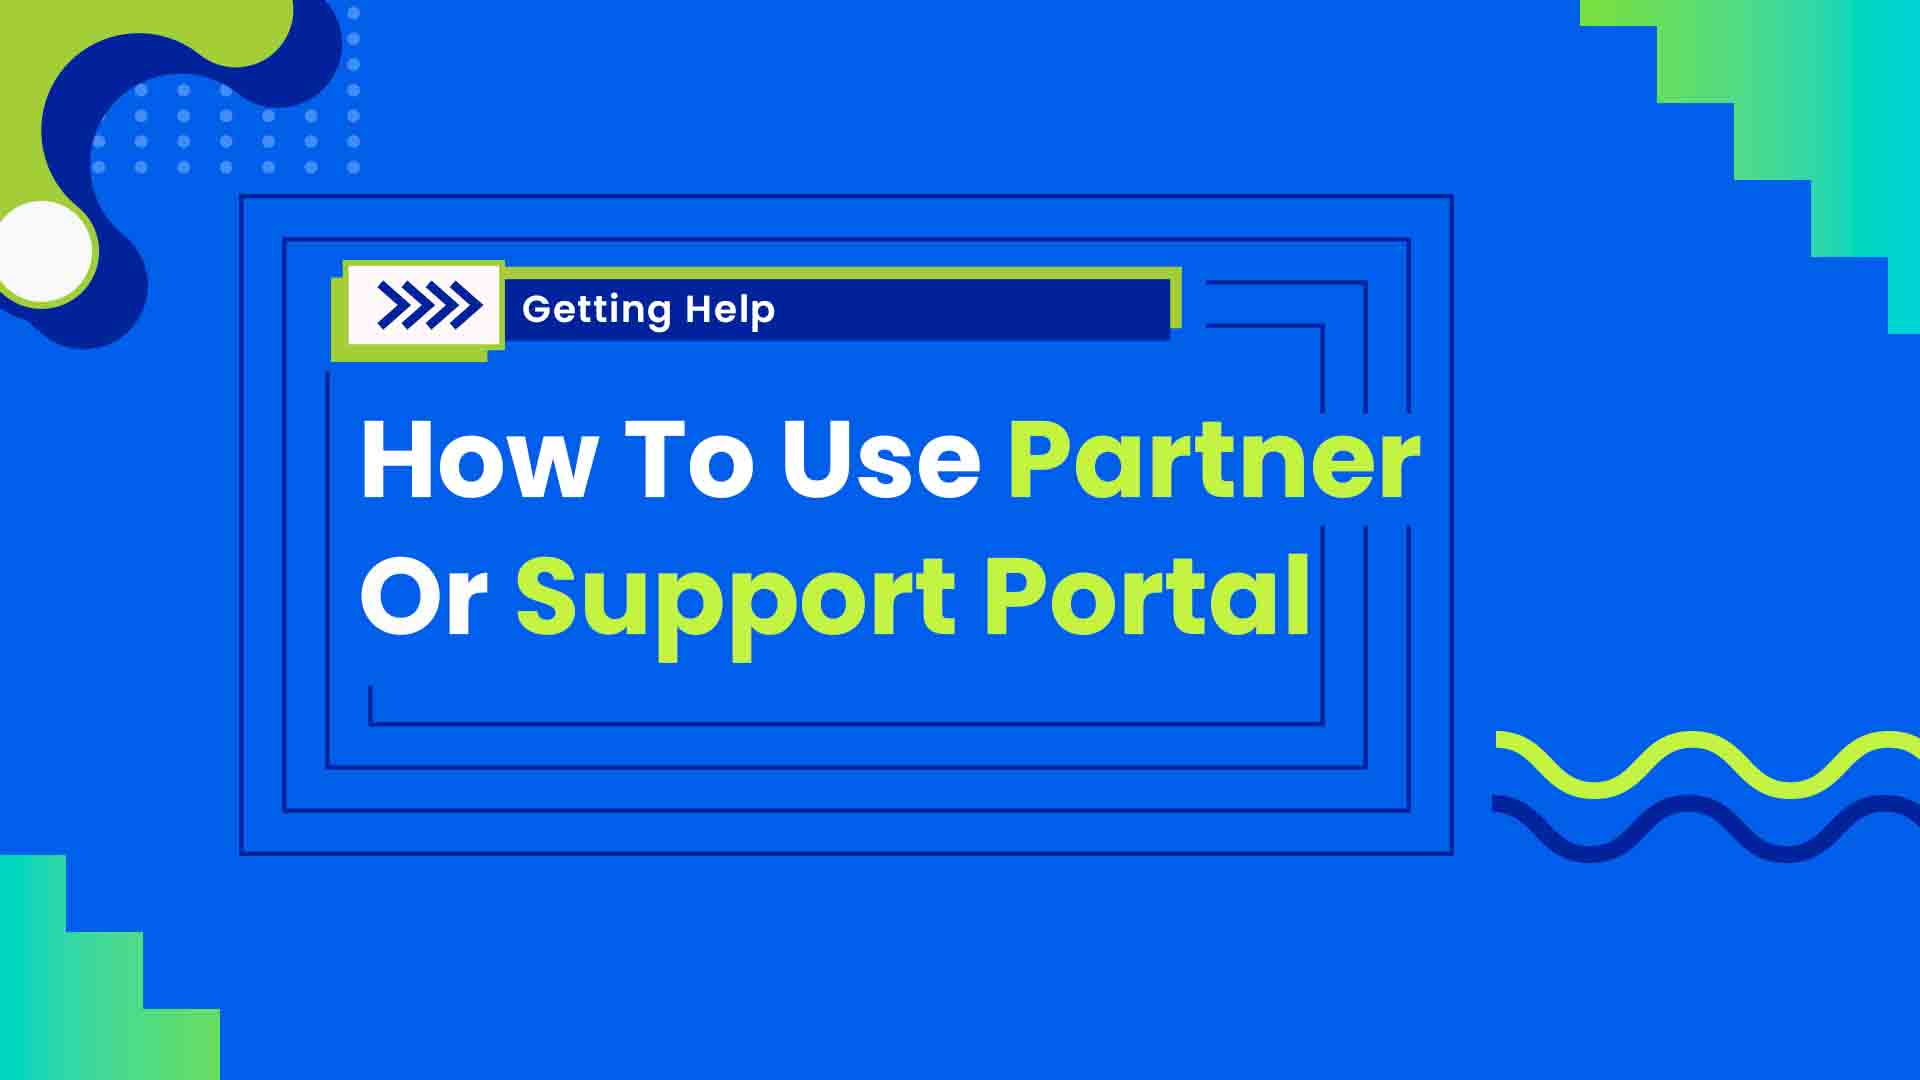 2. How To Use Partner or Support Portal